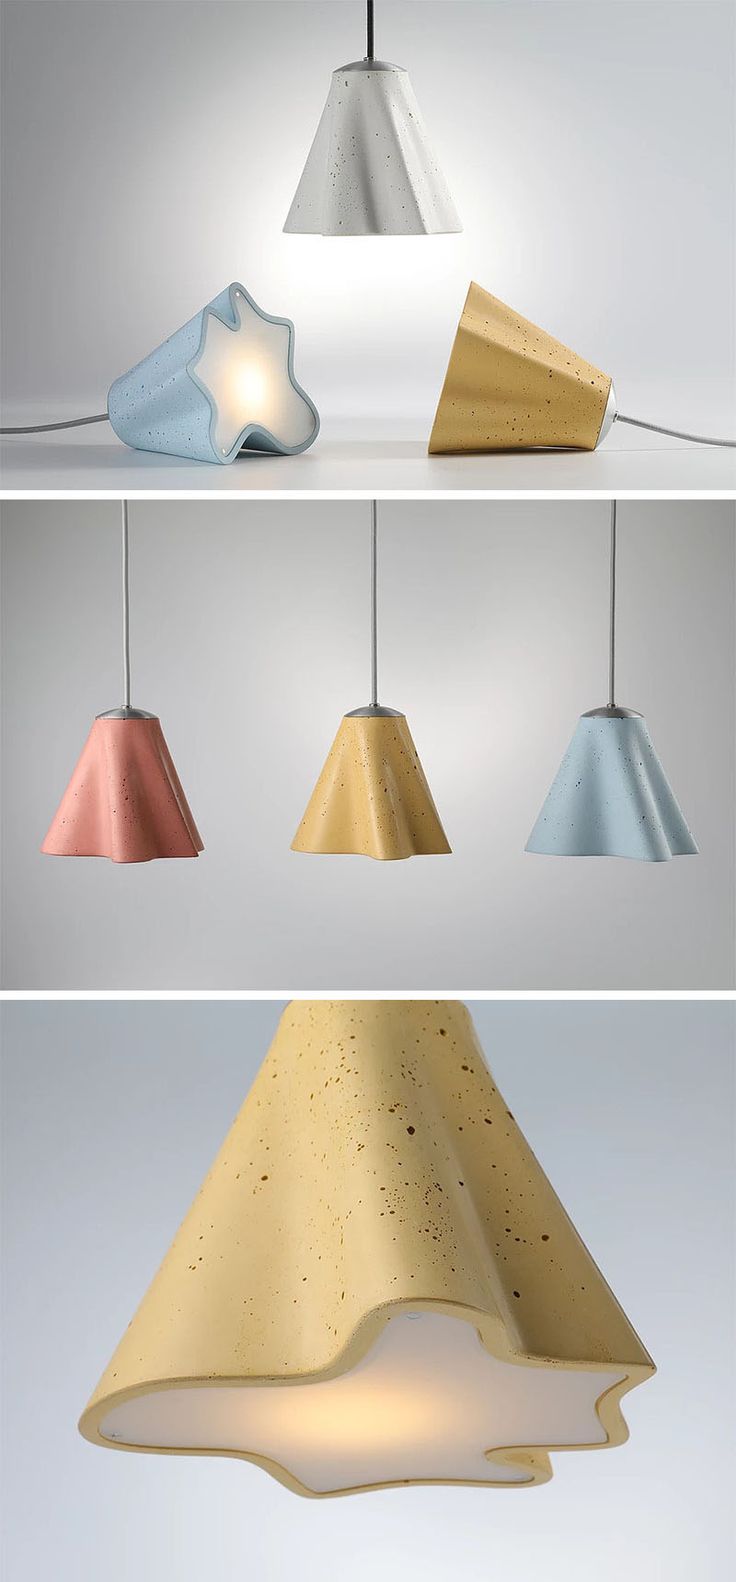 Three New Concrete Lighting Collections By ARDOMA Design